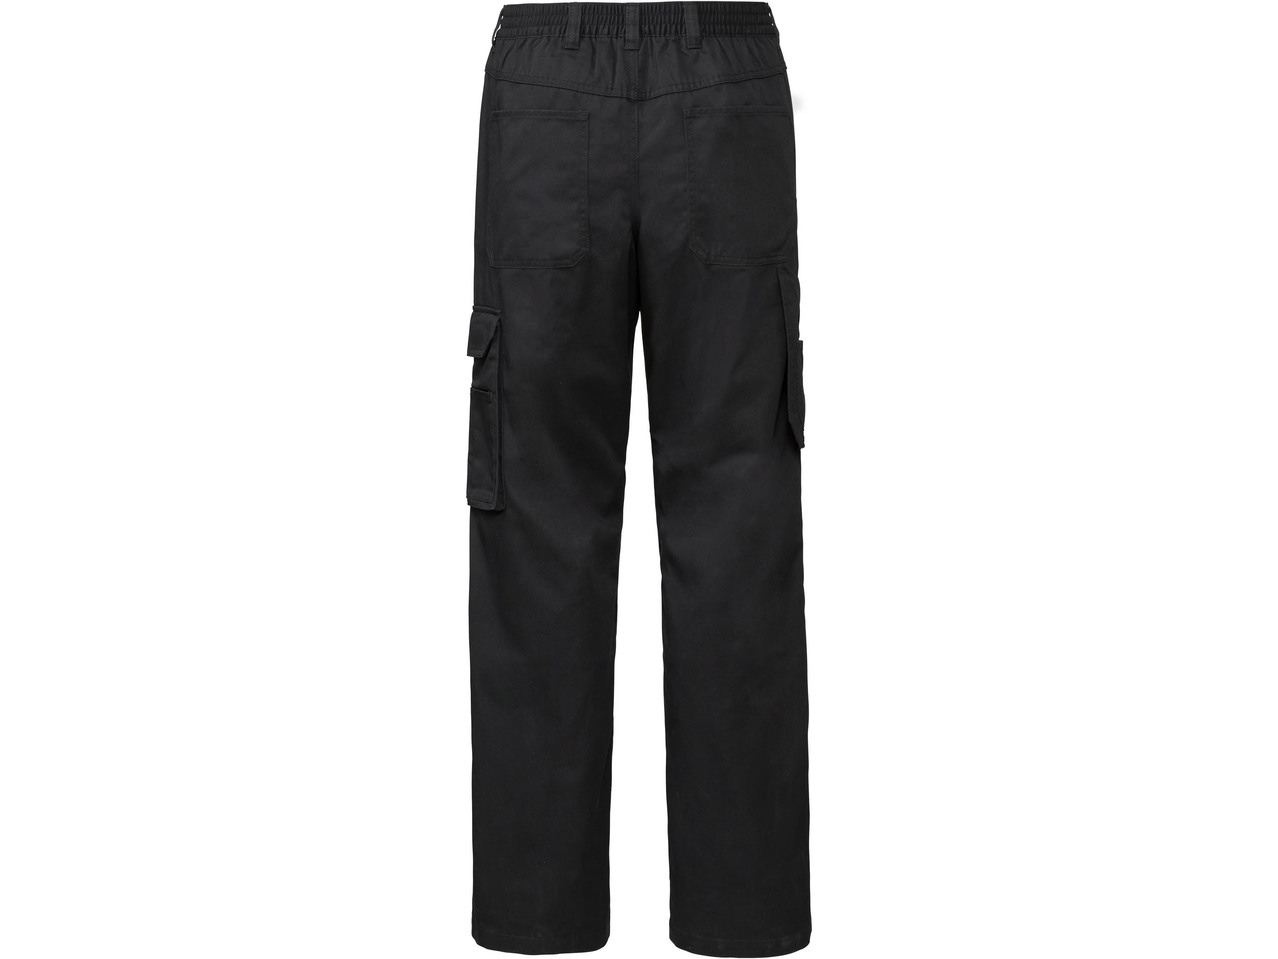 Thermal Work Trousers